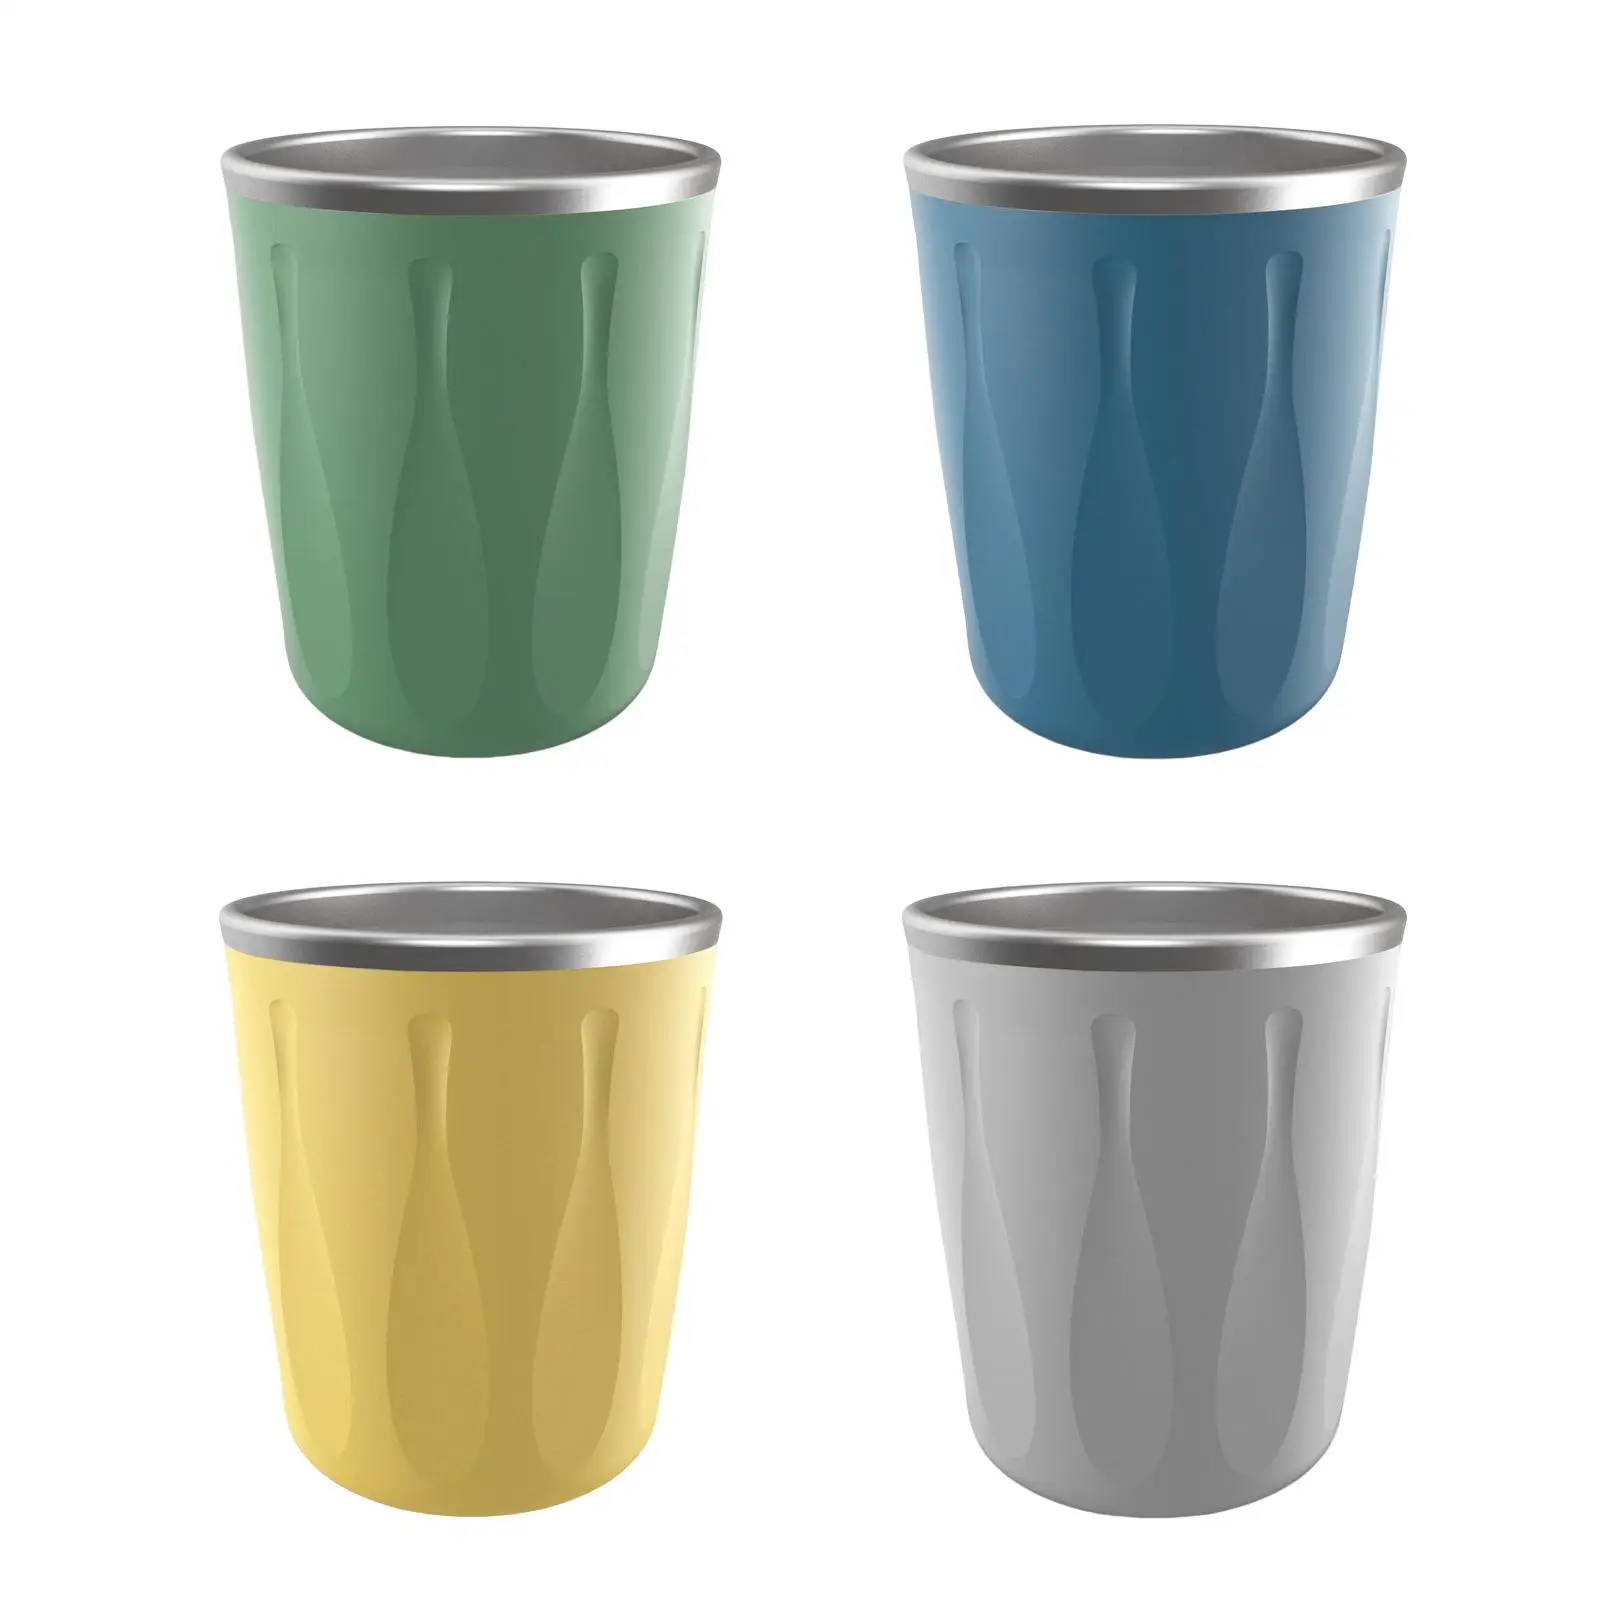 Silicone Vacuum Insulated Tumbler Safe Tall Cup Insulated Double Wall Portable 250ml for Kitchen Beverage